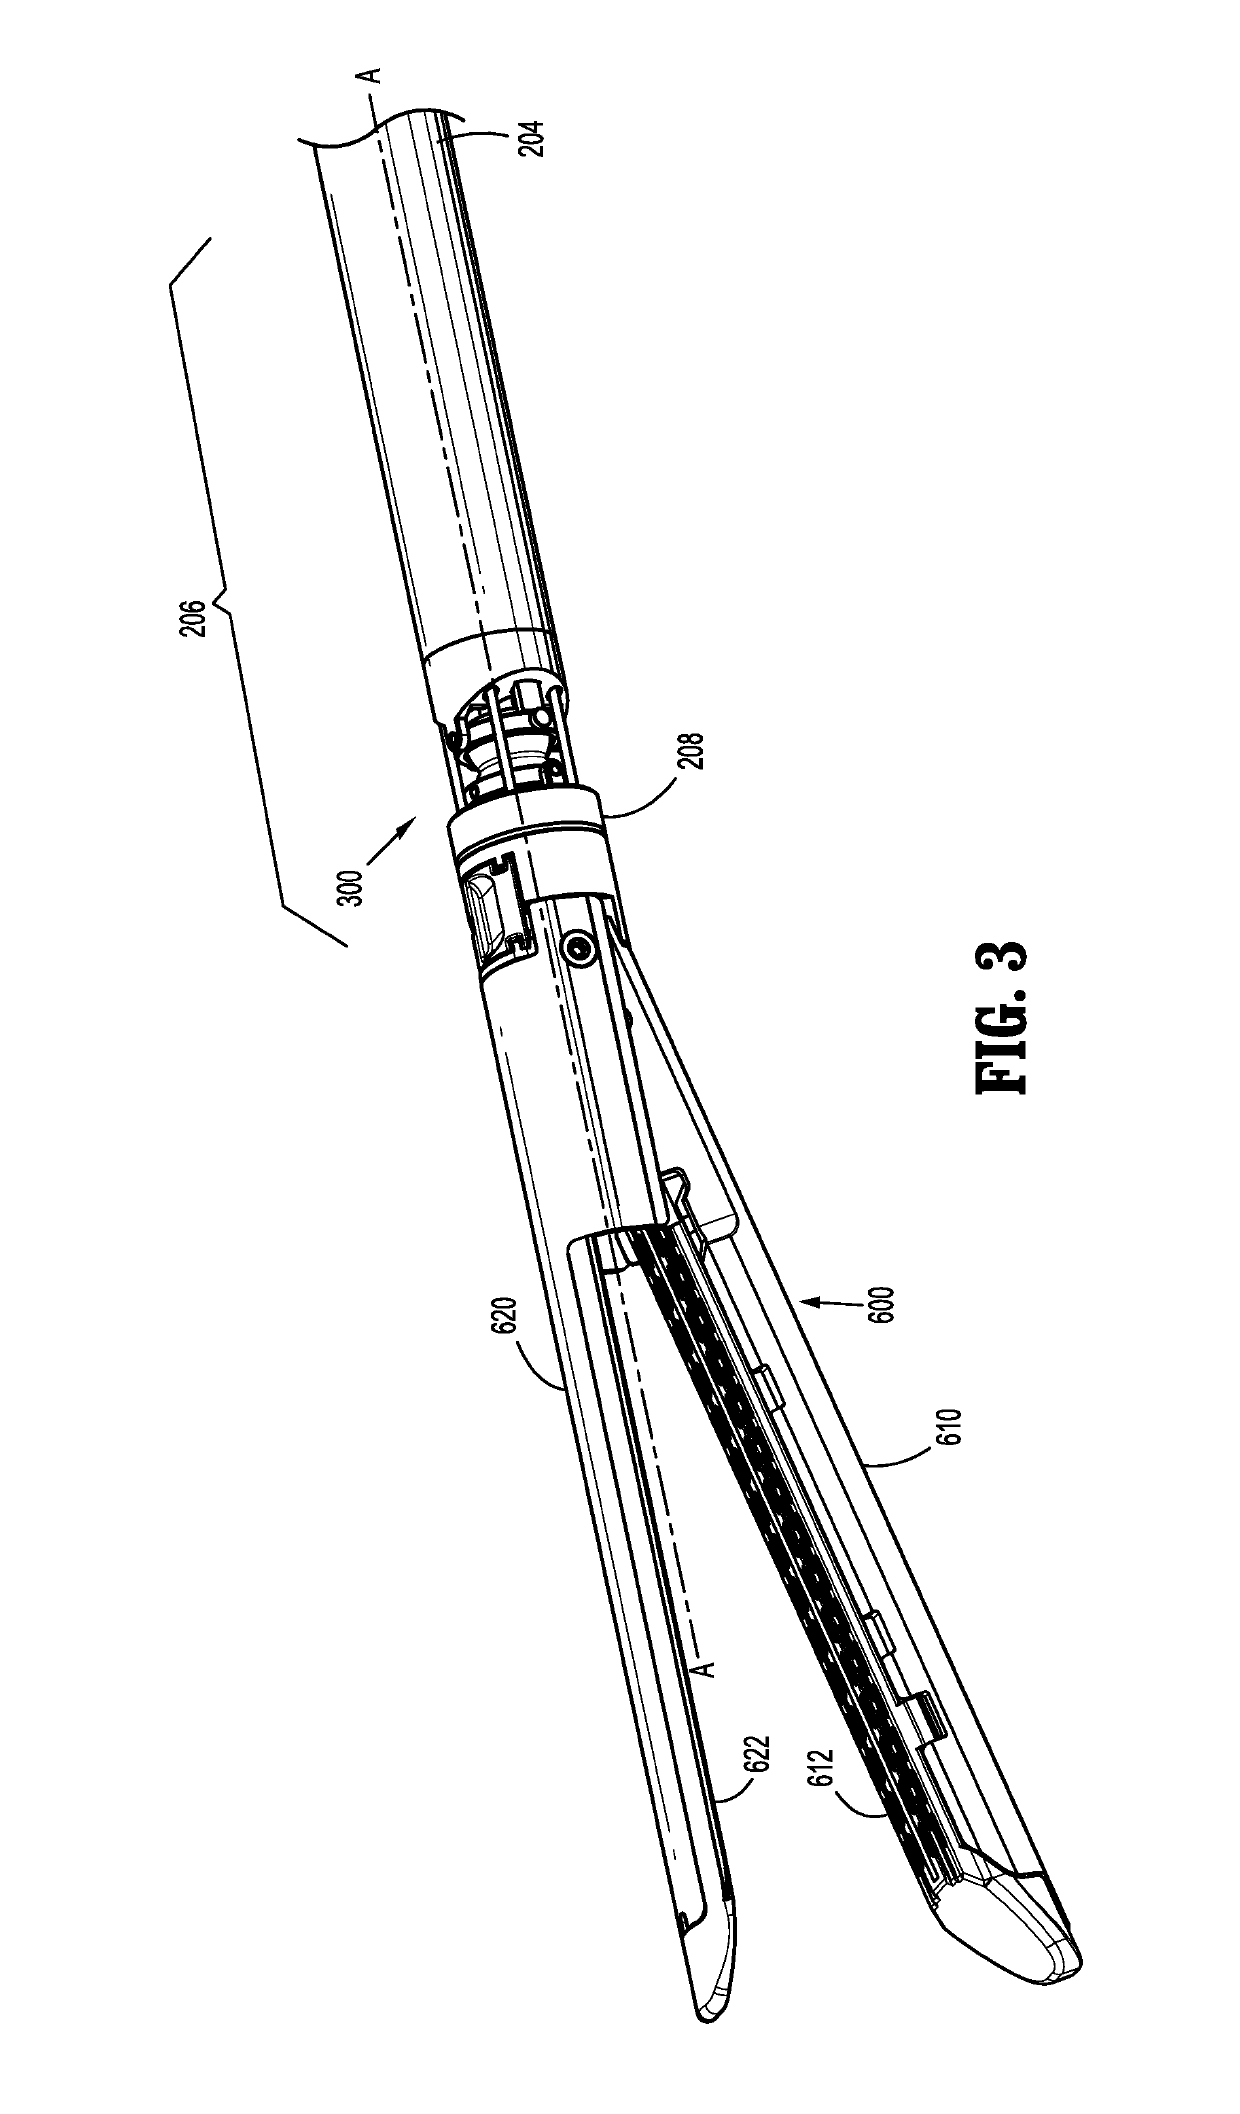 Adapter with centering mechanism for articulation joint